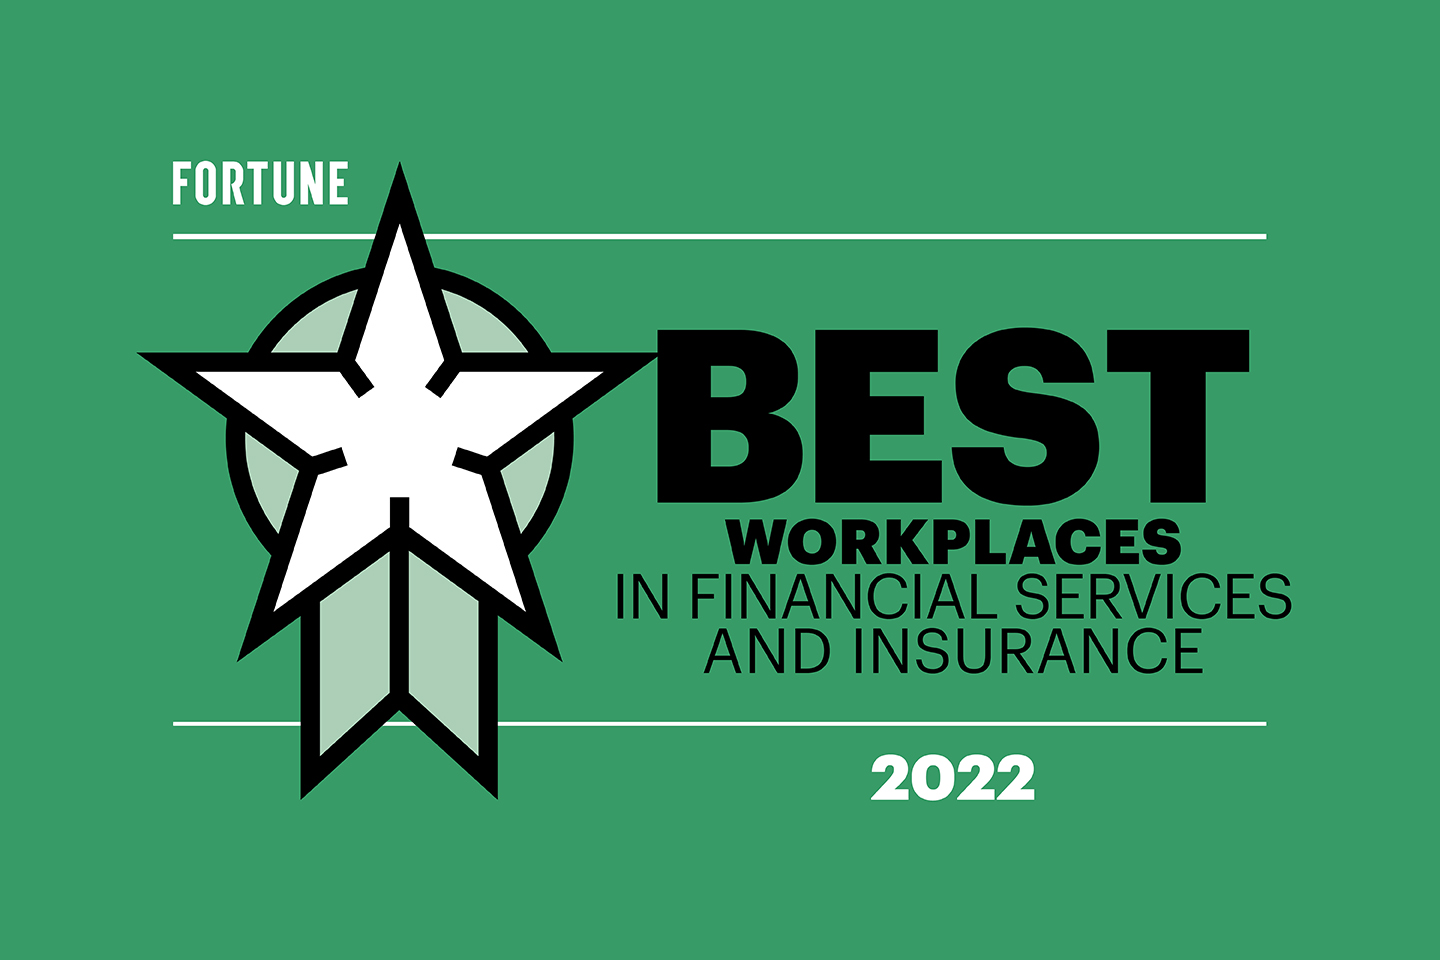 50 Best Large Workplaces in Financial Services and Insurance